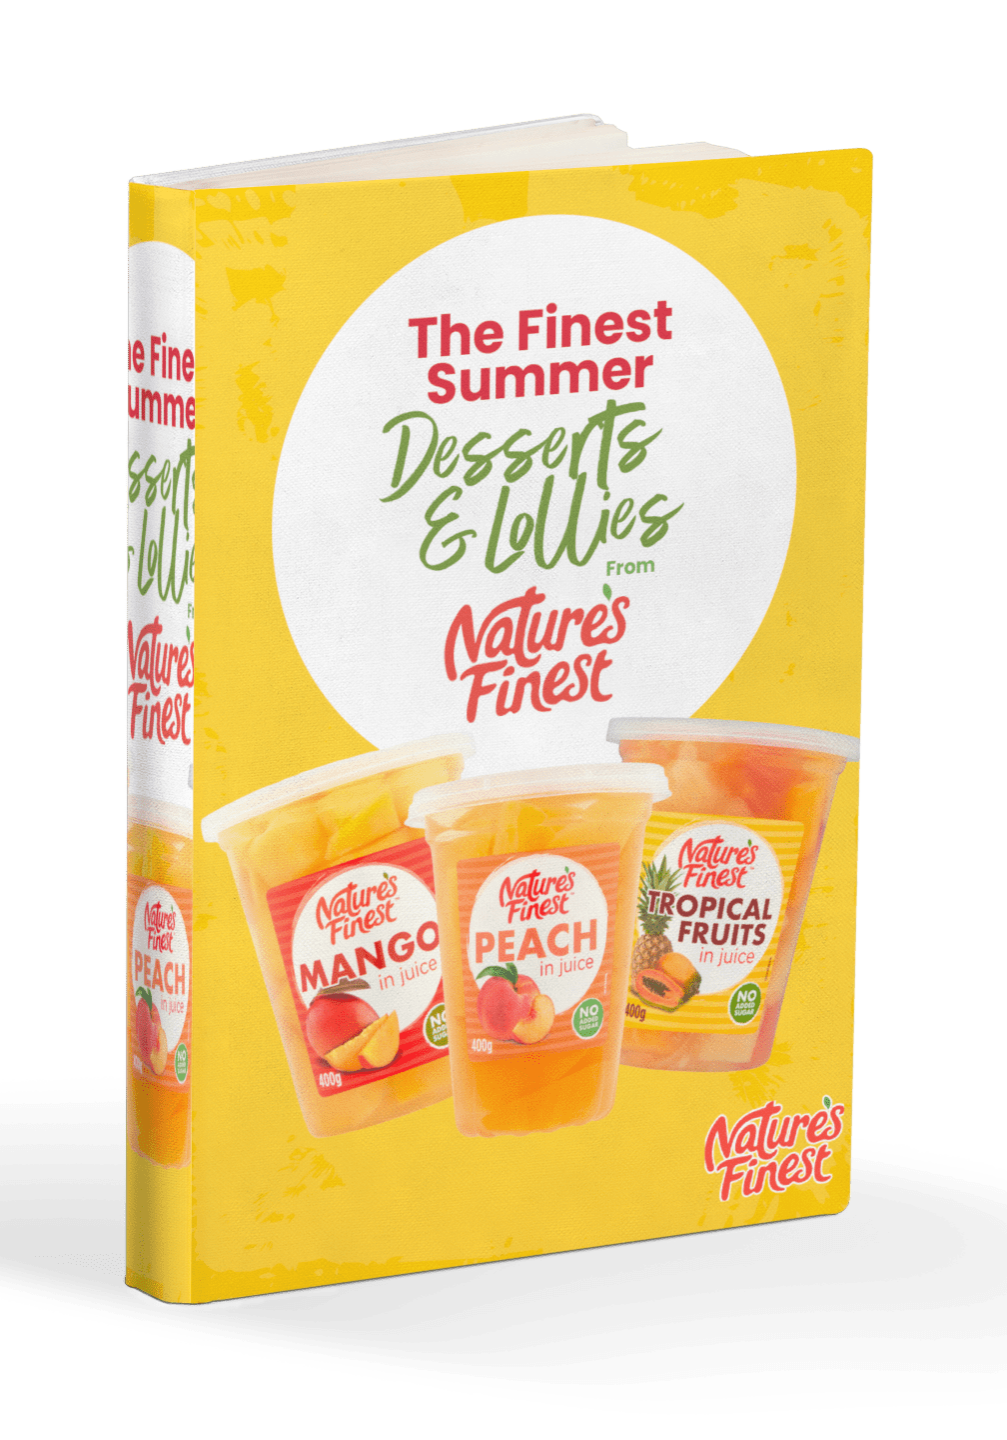 desserts and ice lollies book by Nature's Finest Foods